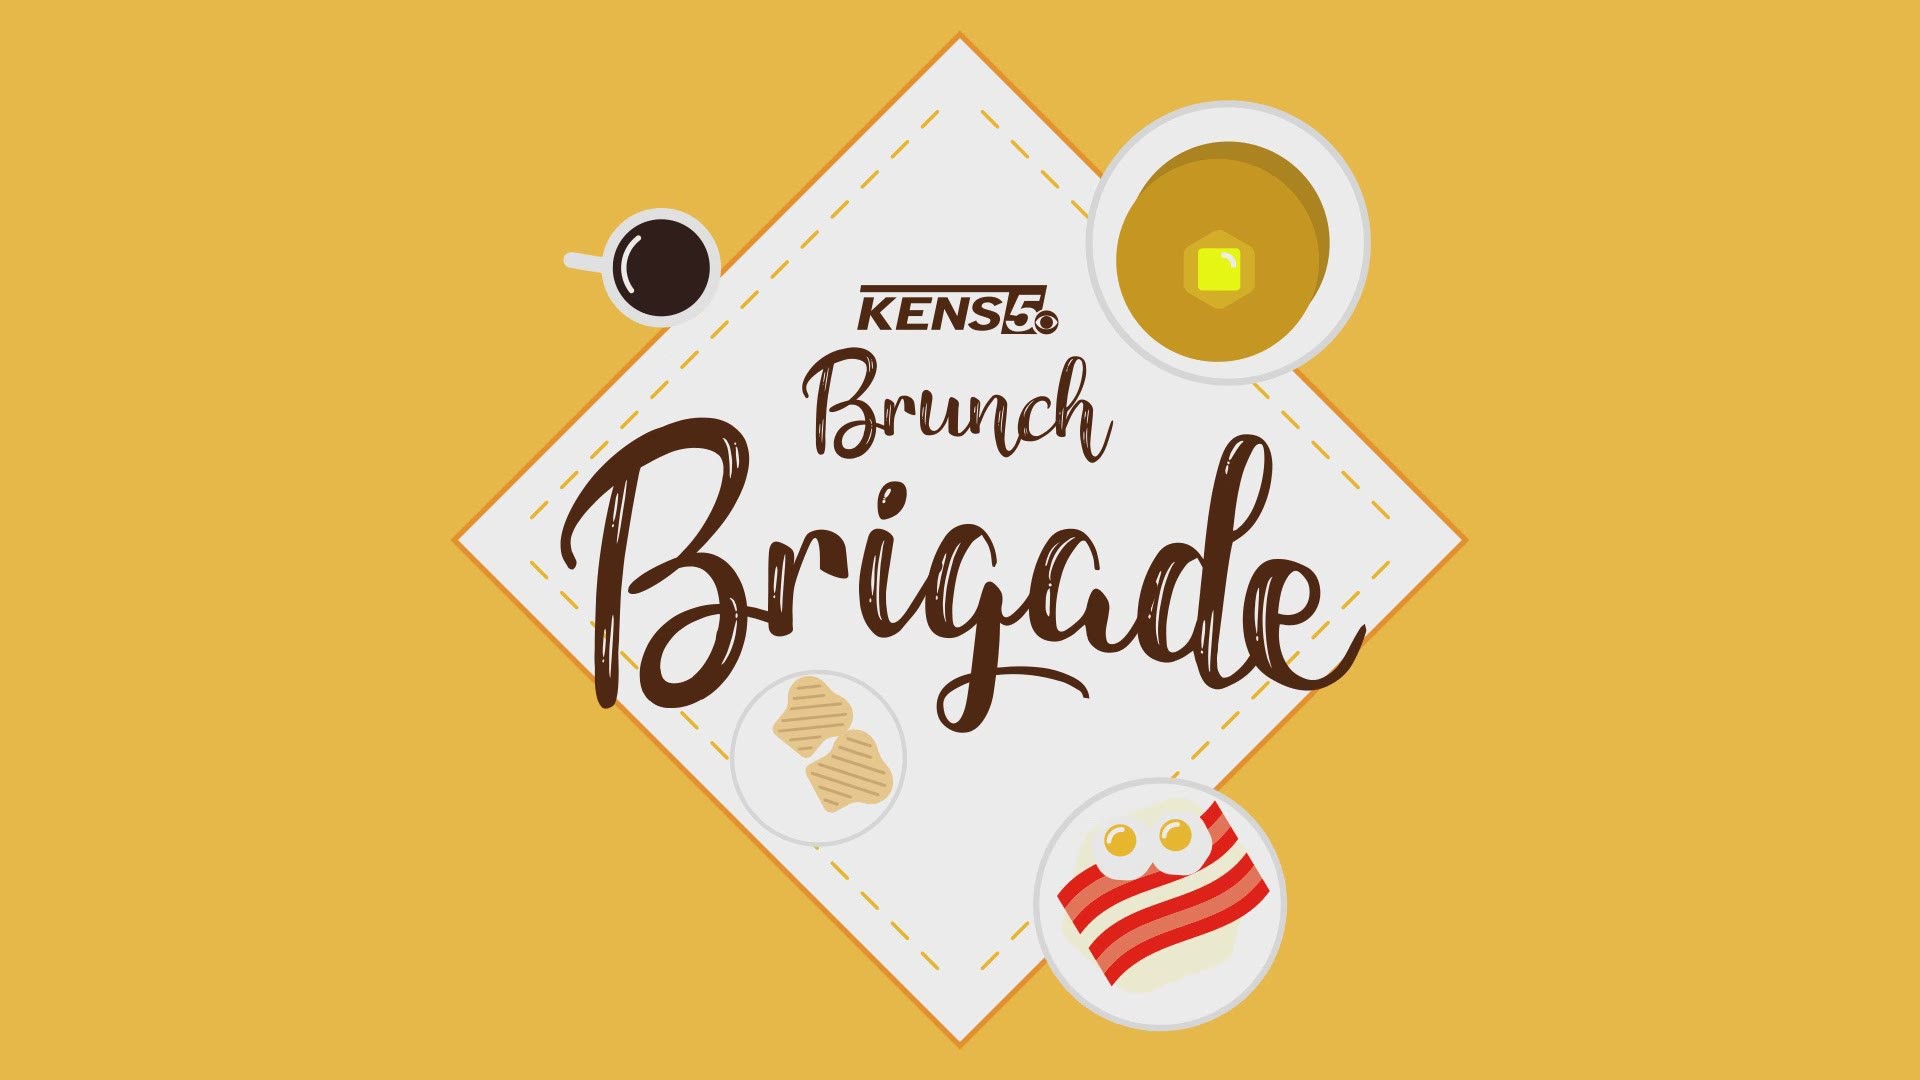 Barbacoa on a pizza! For brunch! Deco Pizzeria's brunch menu is as creative as it is tasty, combining San Antonio favorites and breakfast classics on its signature pizza crust. Check out the new location in the Medical Center with KENS 5's Brunch Brigade!